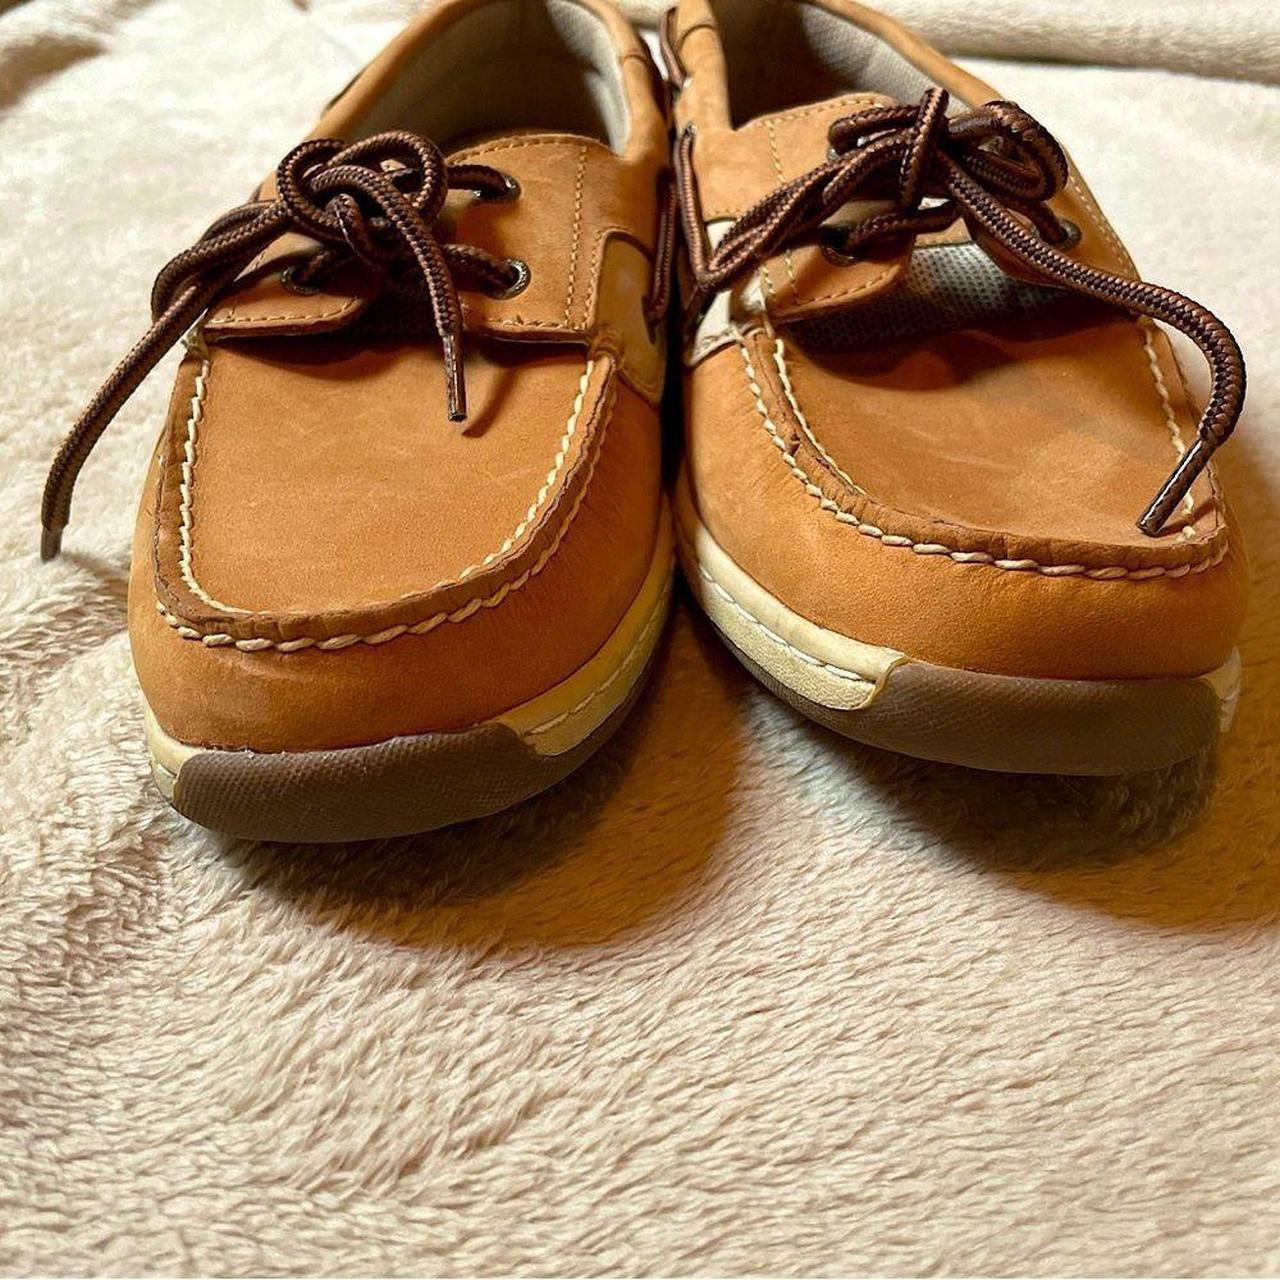 Eastland Women's Cream and Tan Boat-shoes (4)